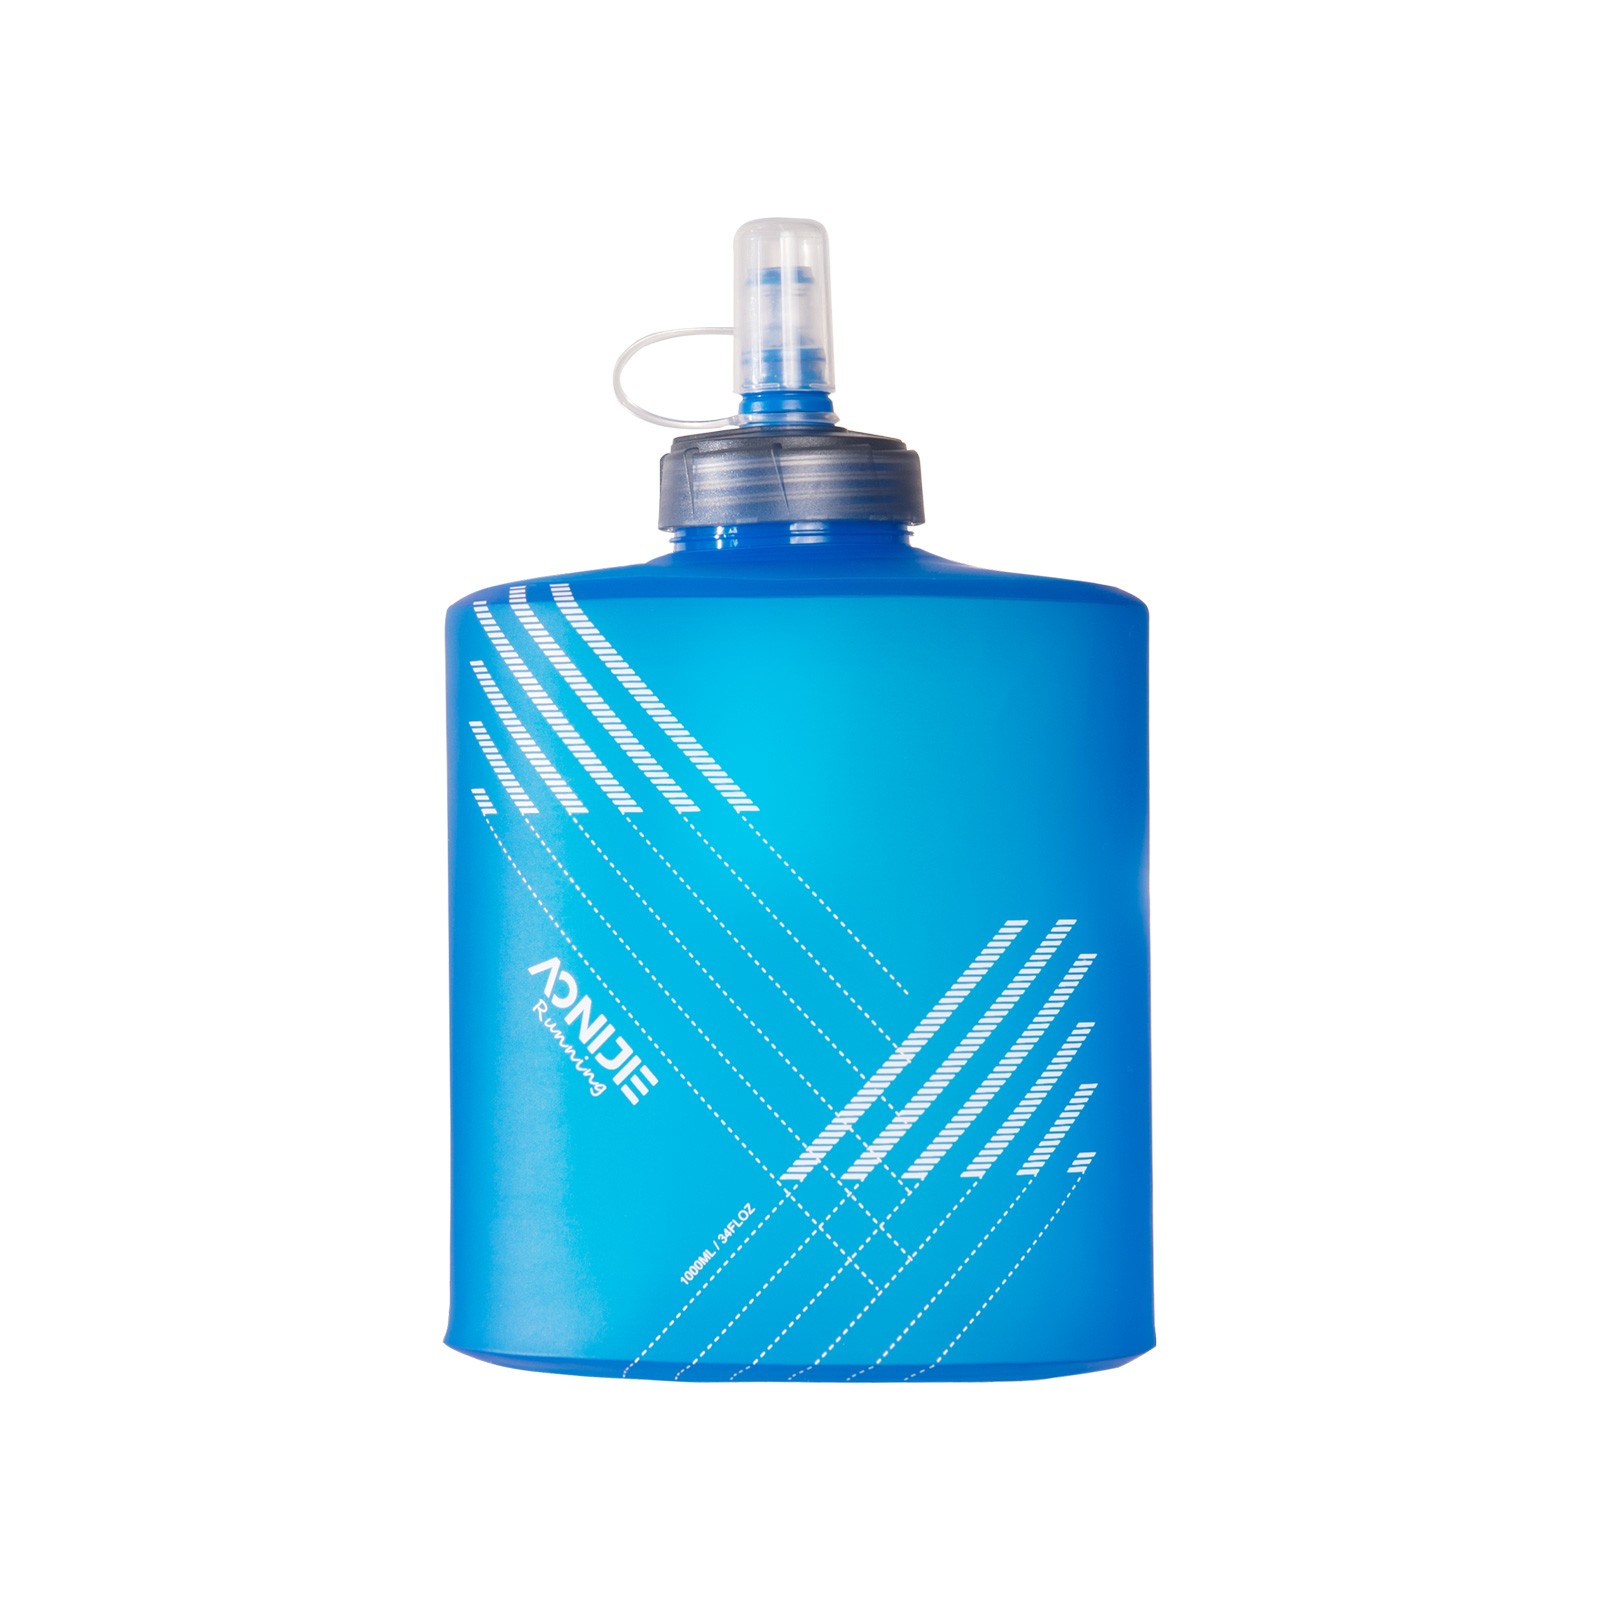 AONIJIE SD29 New Design Outdoor Running Filter Kettle Bottle 1L 2L Soft Flask Hydration Kettle BPA Free for Traveling Hiking Cycling